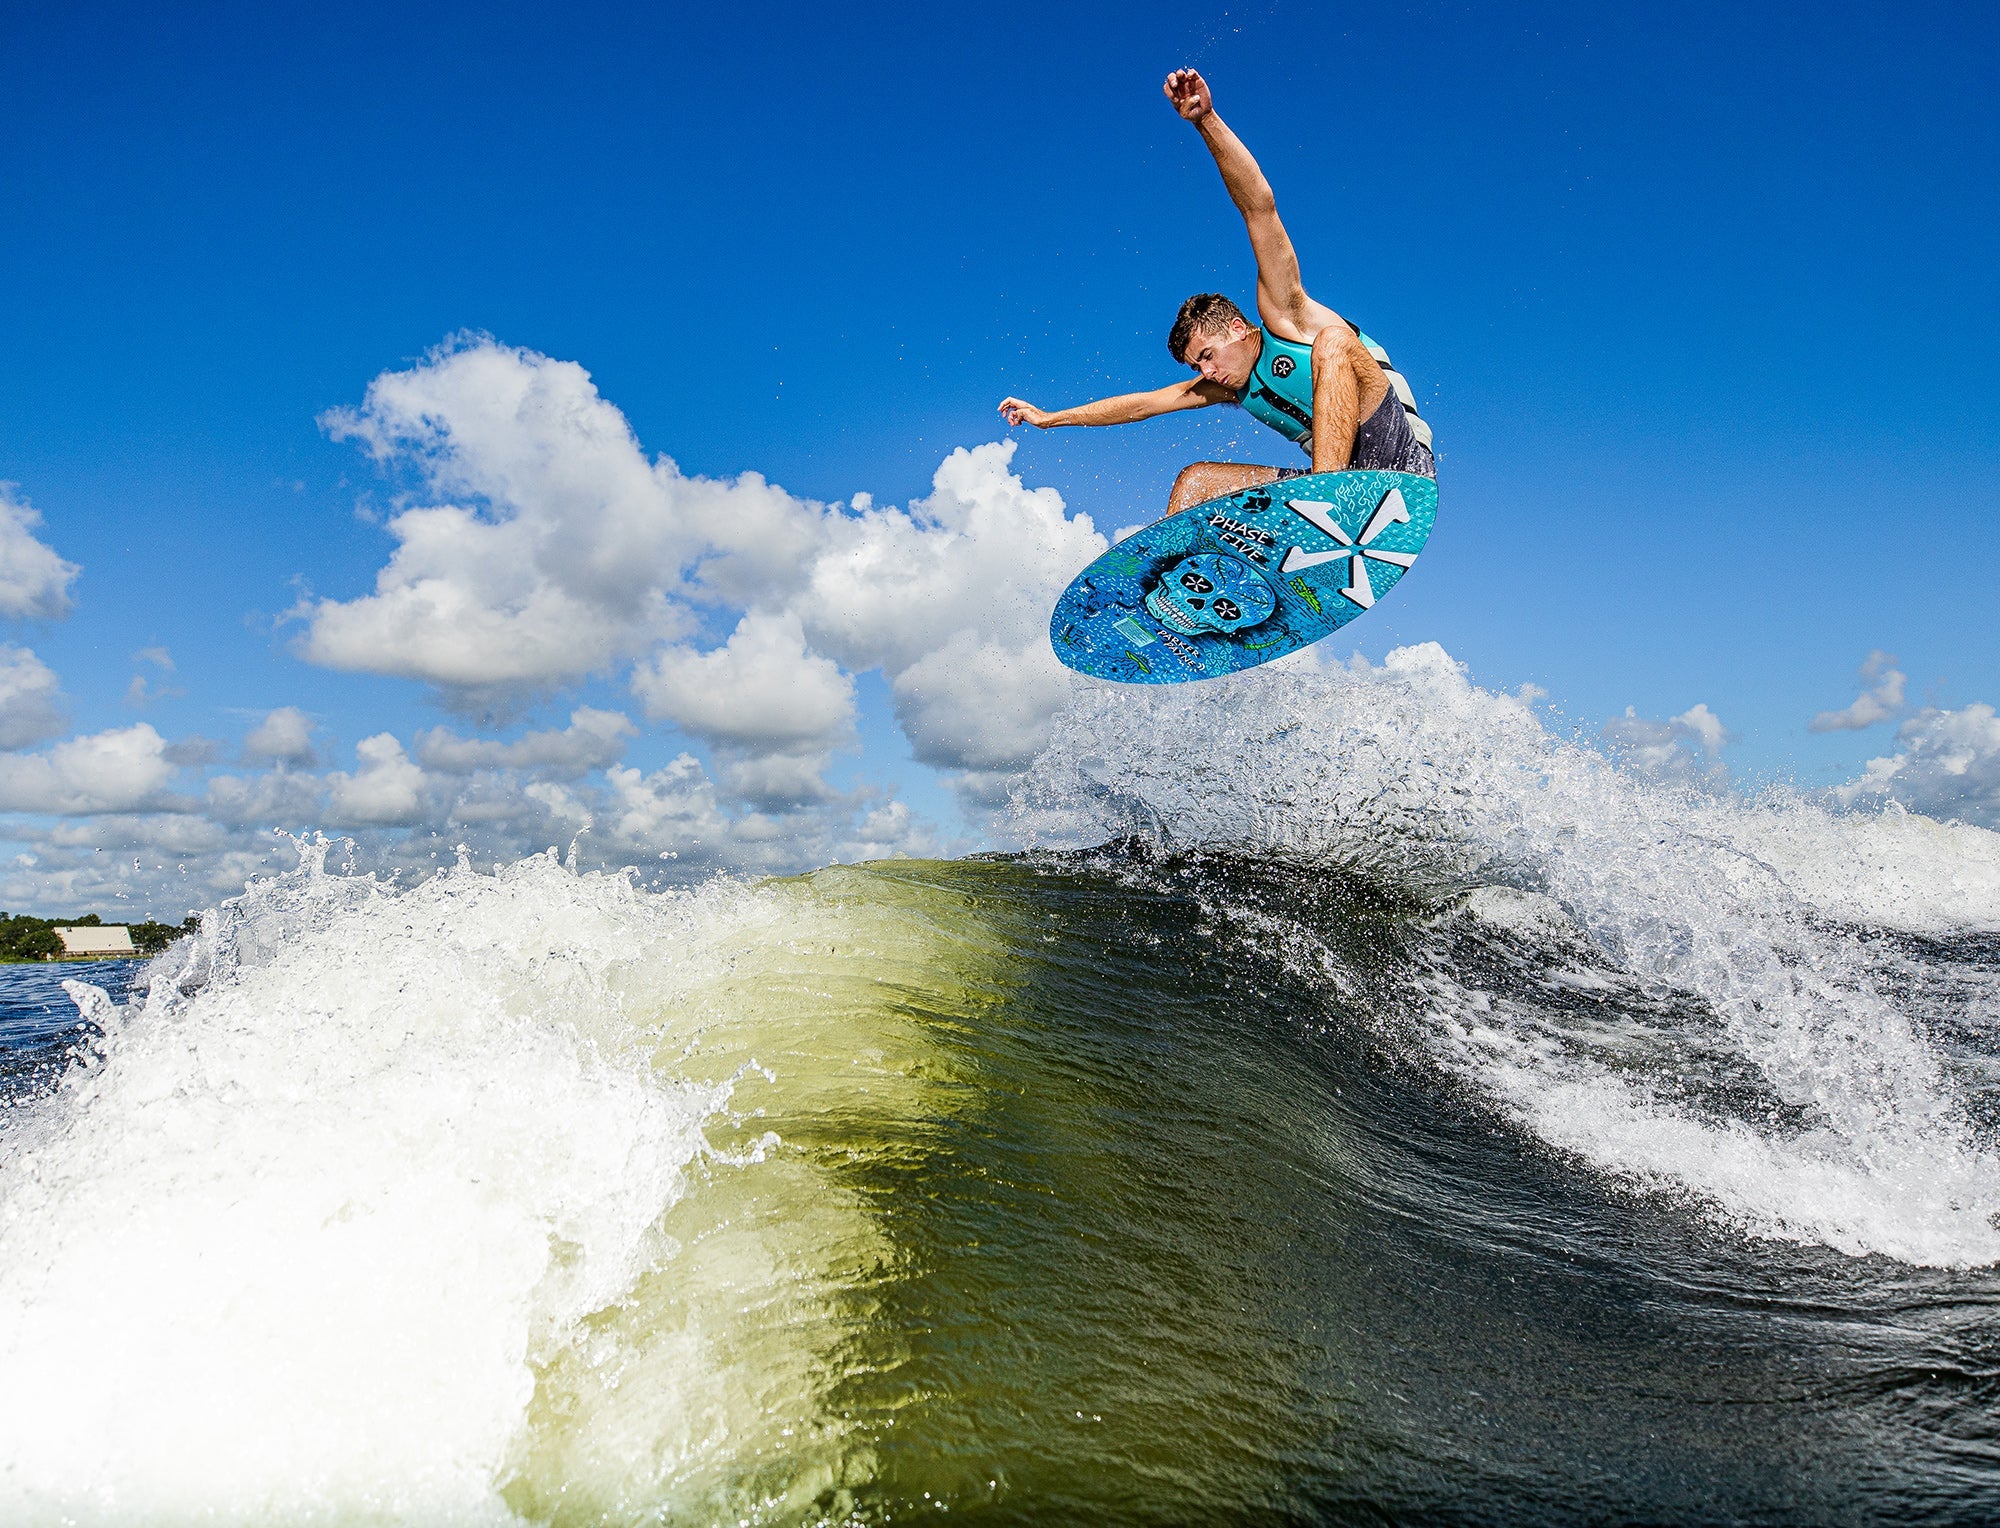 A man is riding a wave on a surfboard, showcasing his skills with the Phase 5 2023 Matrix Payne Pro Wakesurf Board. With its Matrix design and Skim Style, he effortlessly glides across the water, mastering every move.